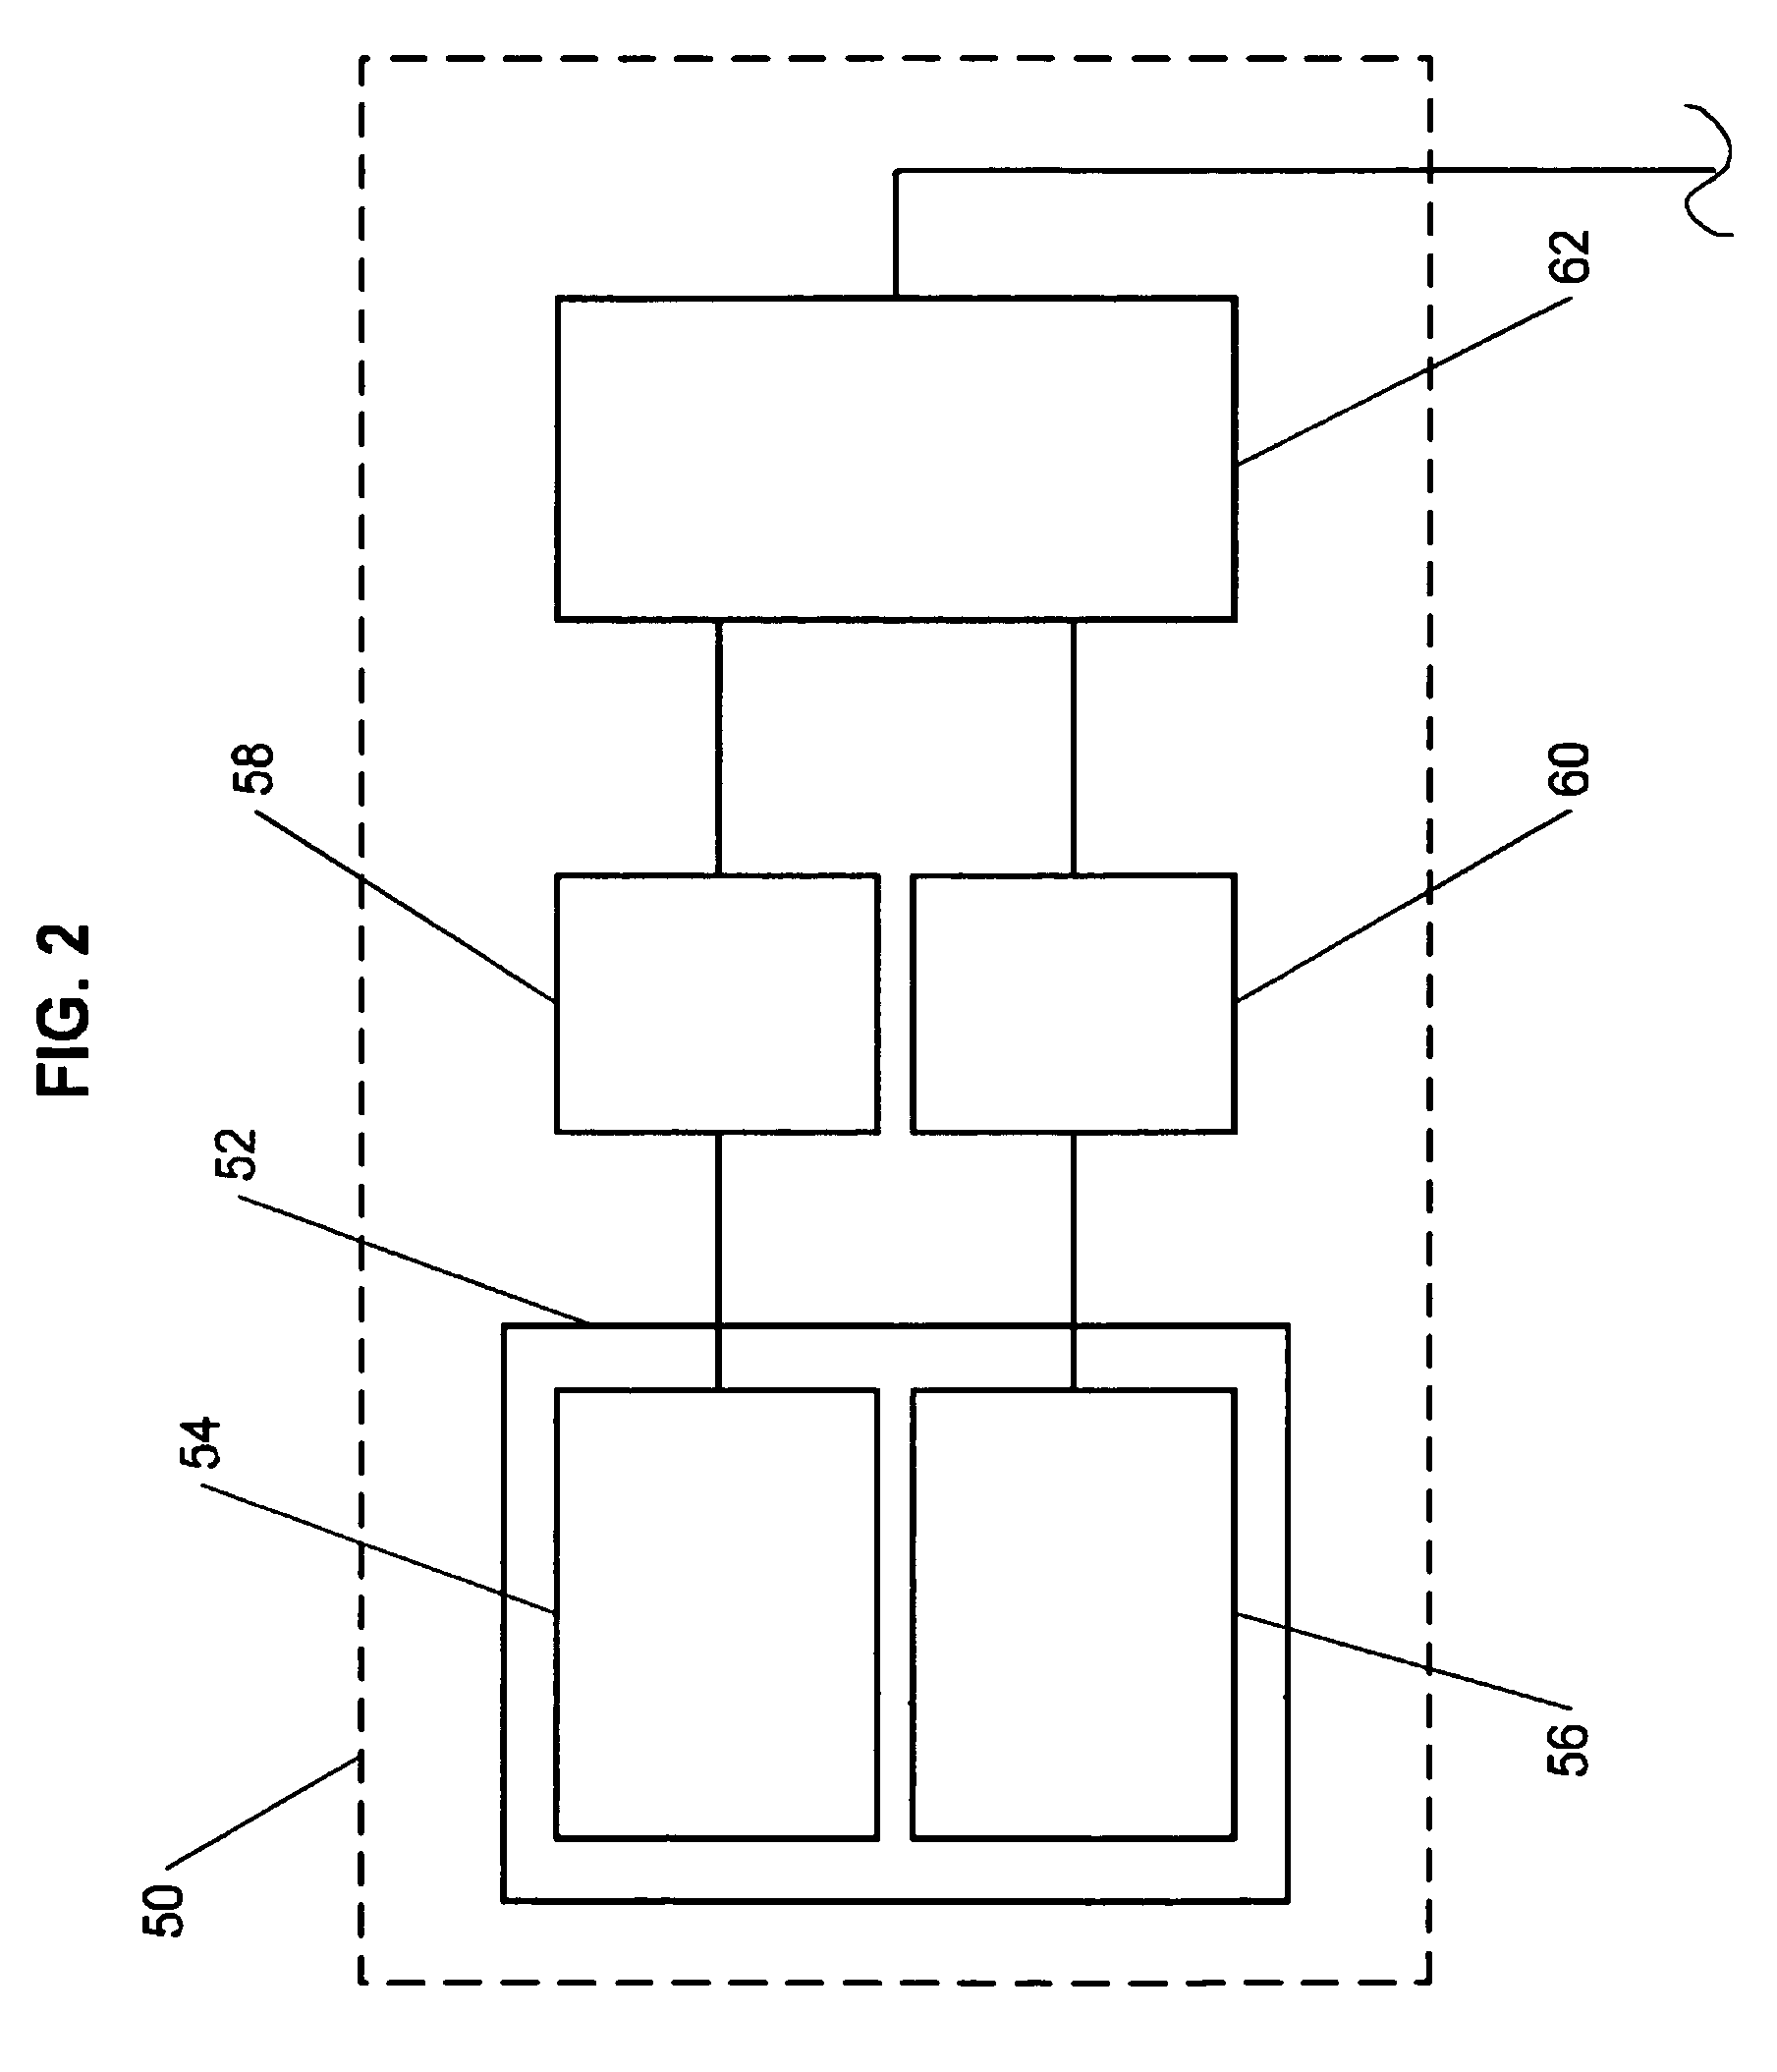 Electrical generator having an oscillator containing a freely moving internal element to improve generator effectiveness